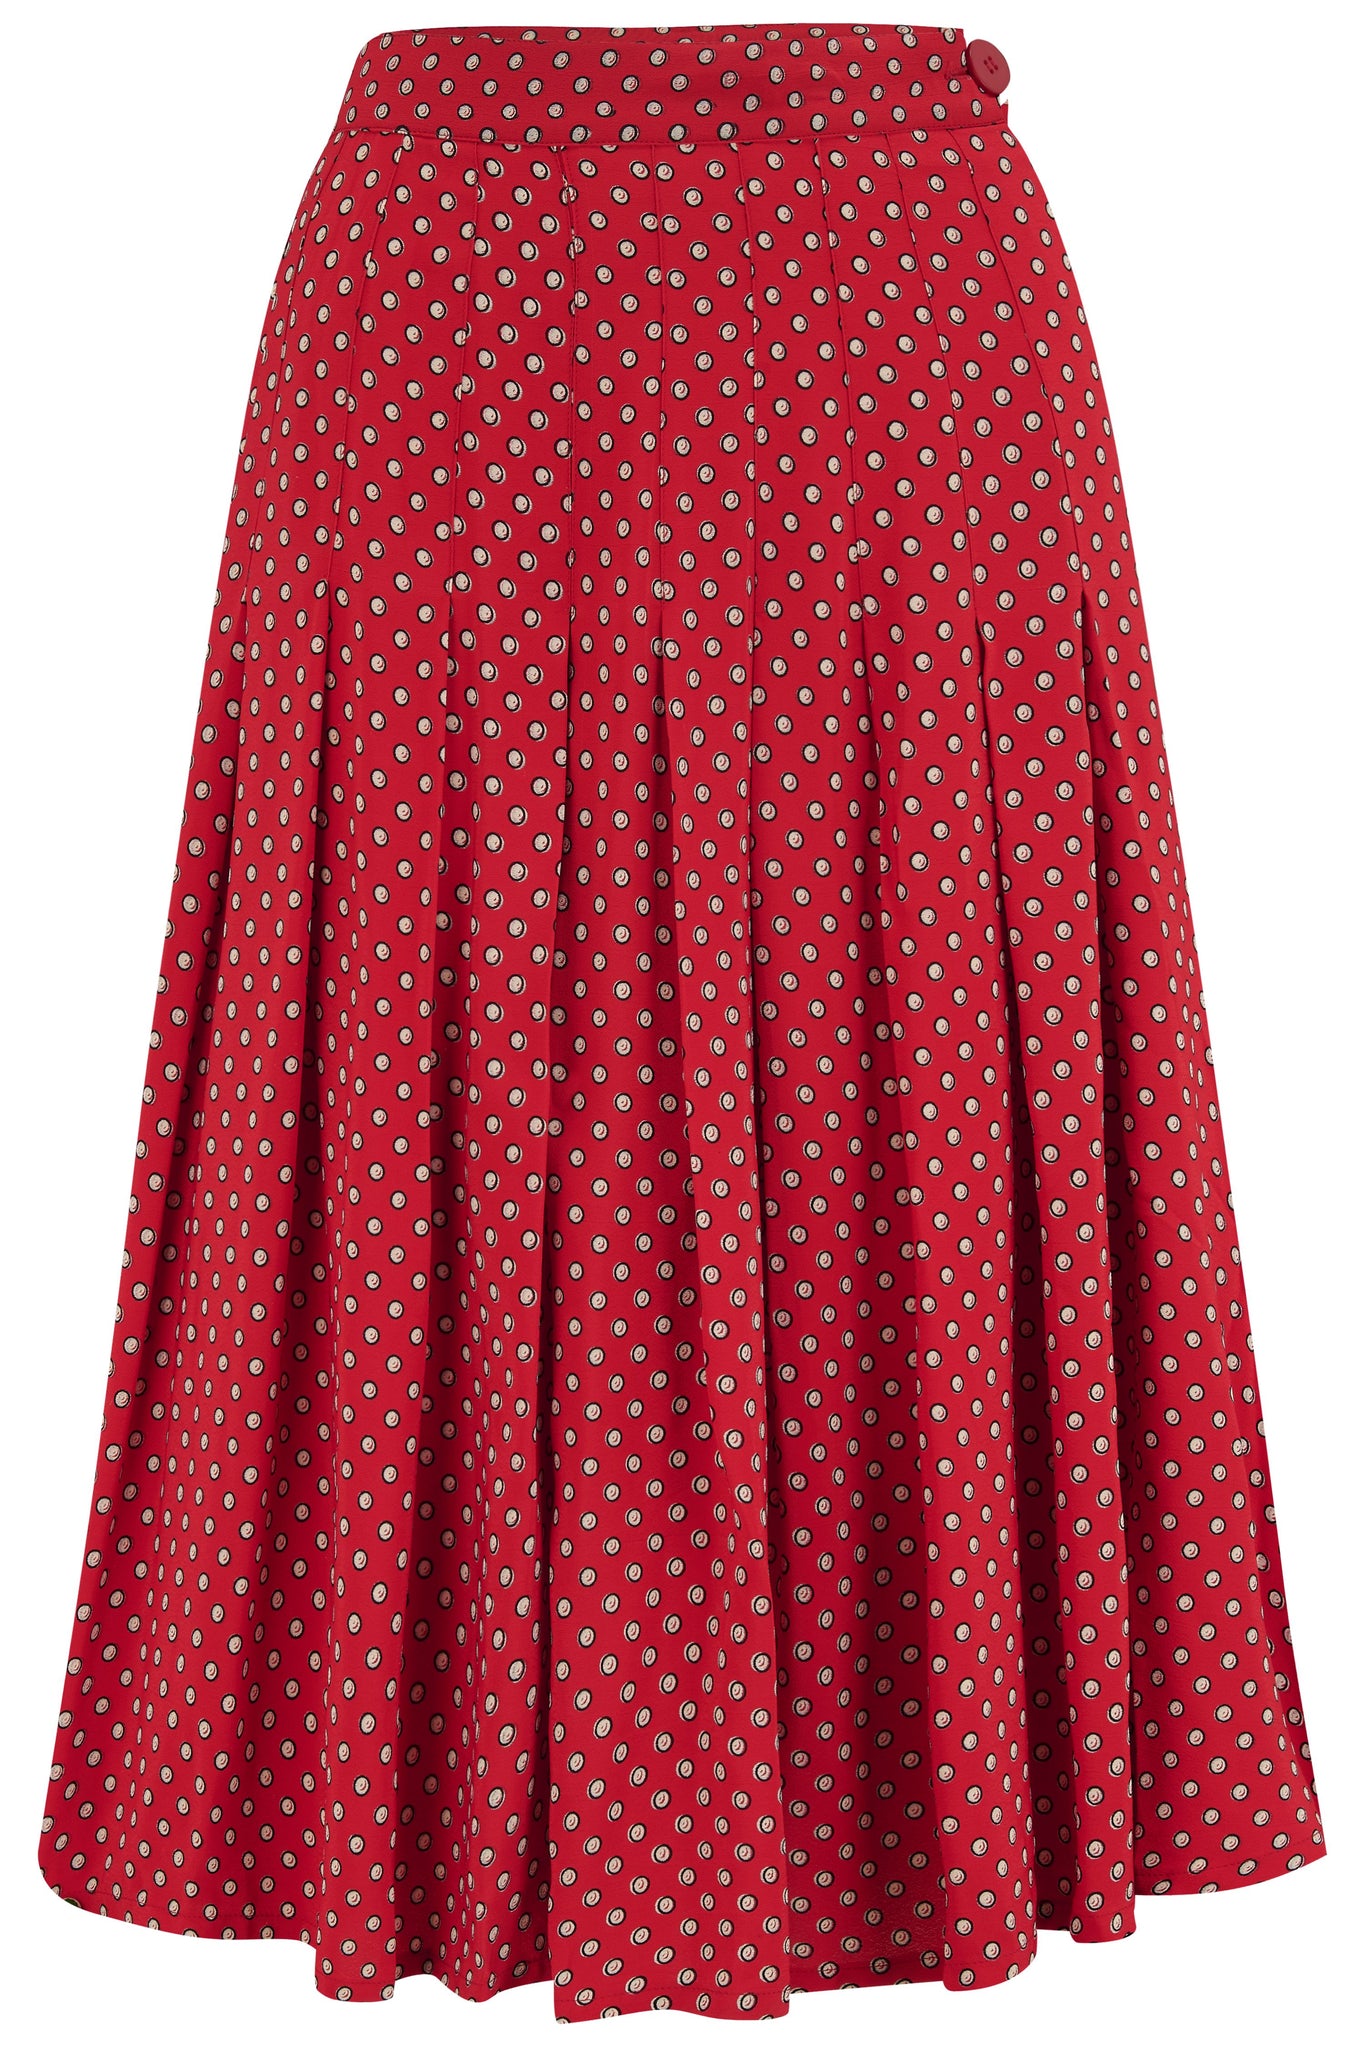 The "Lucille" Pleated Skirt in Red Ditzy Dot, Classic & Authentic 1940s Vintage Inspired Style - CC41, Goodwood Revival, Twinwood Festival, Viva Las Vegas Rockabilly Weekend Rock n Romance The Seamstress Of Bloomsbury